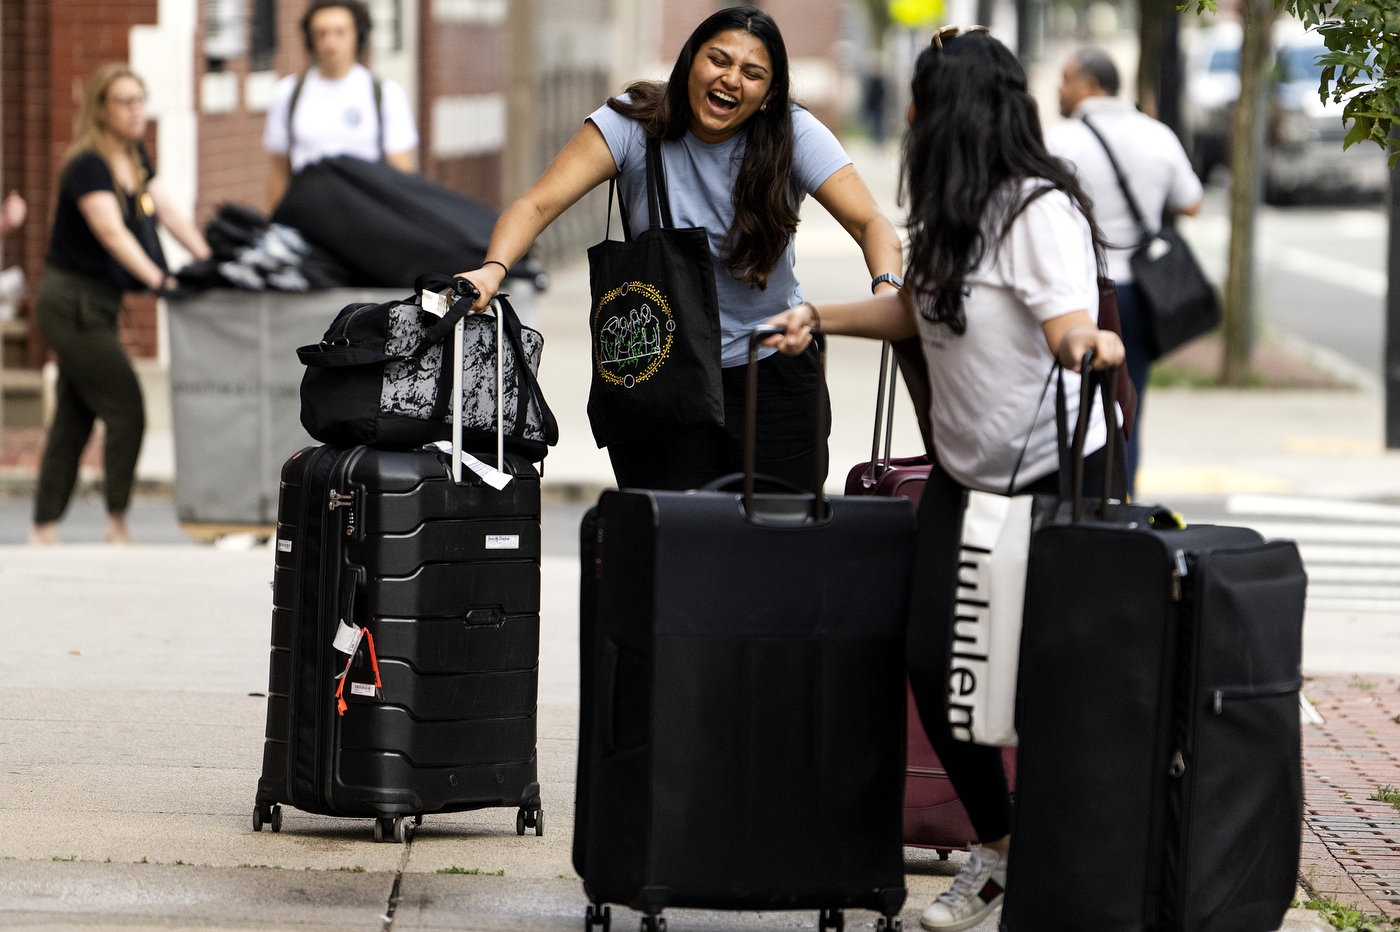 Two students stand on the sidewalk with their luggage. One person is facing forward laughing and the other is turned talking to the other student